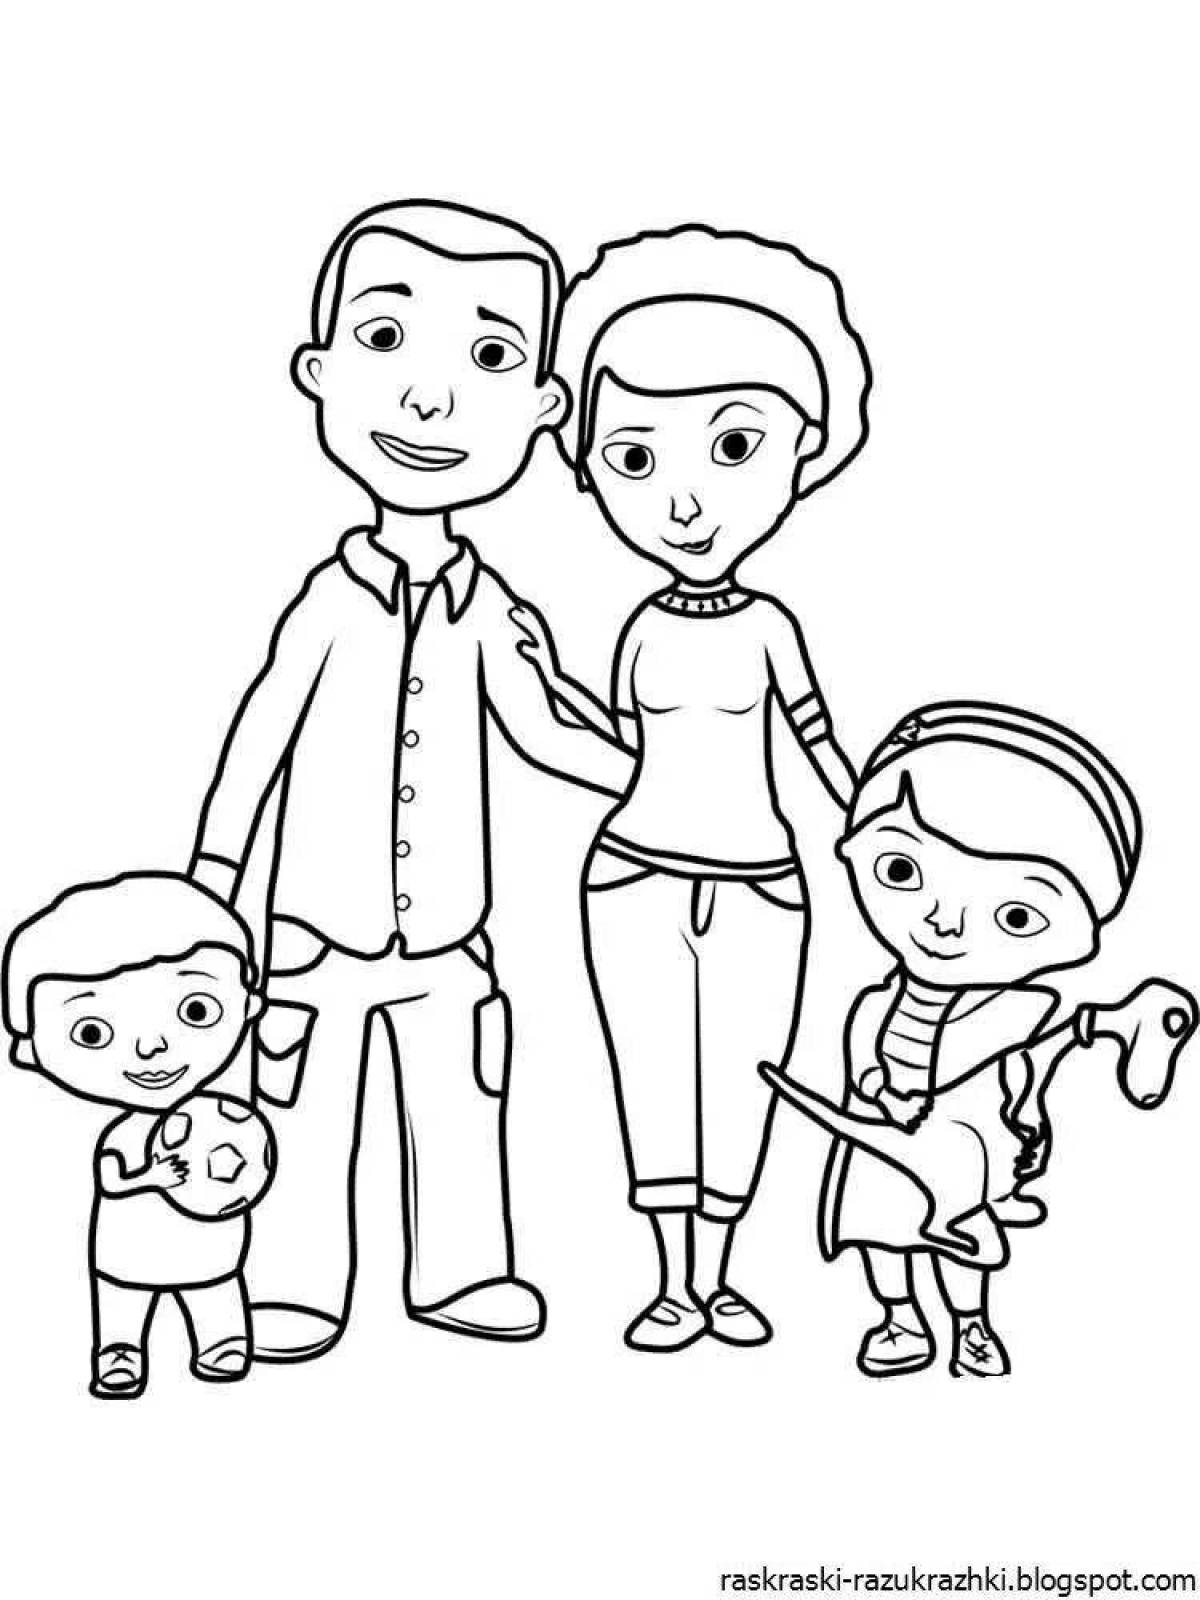 Adorable drawing of my family